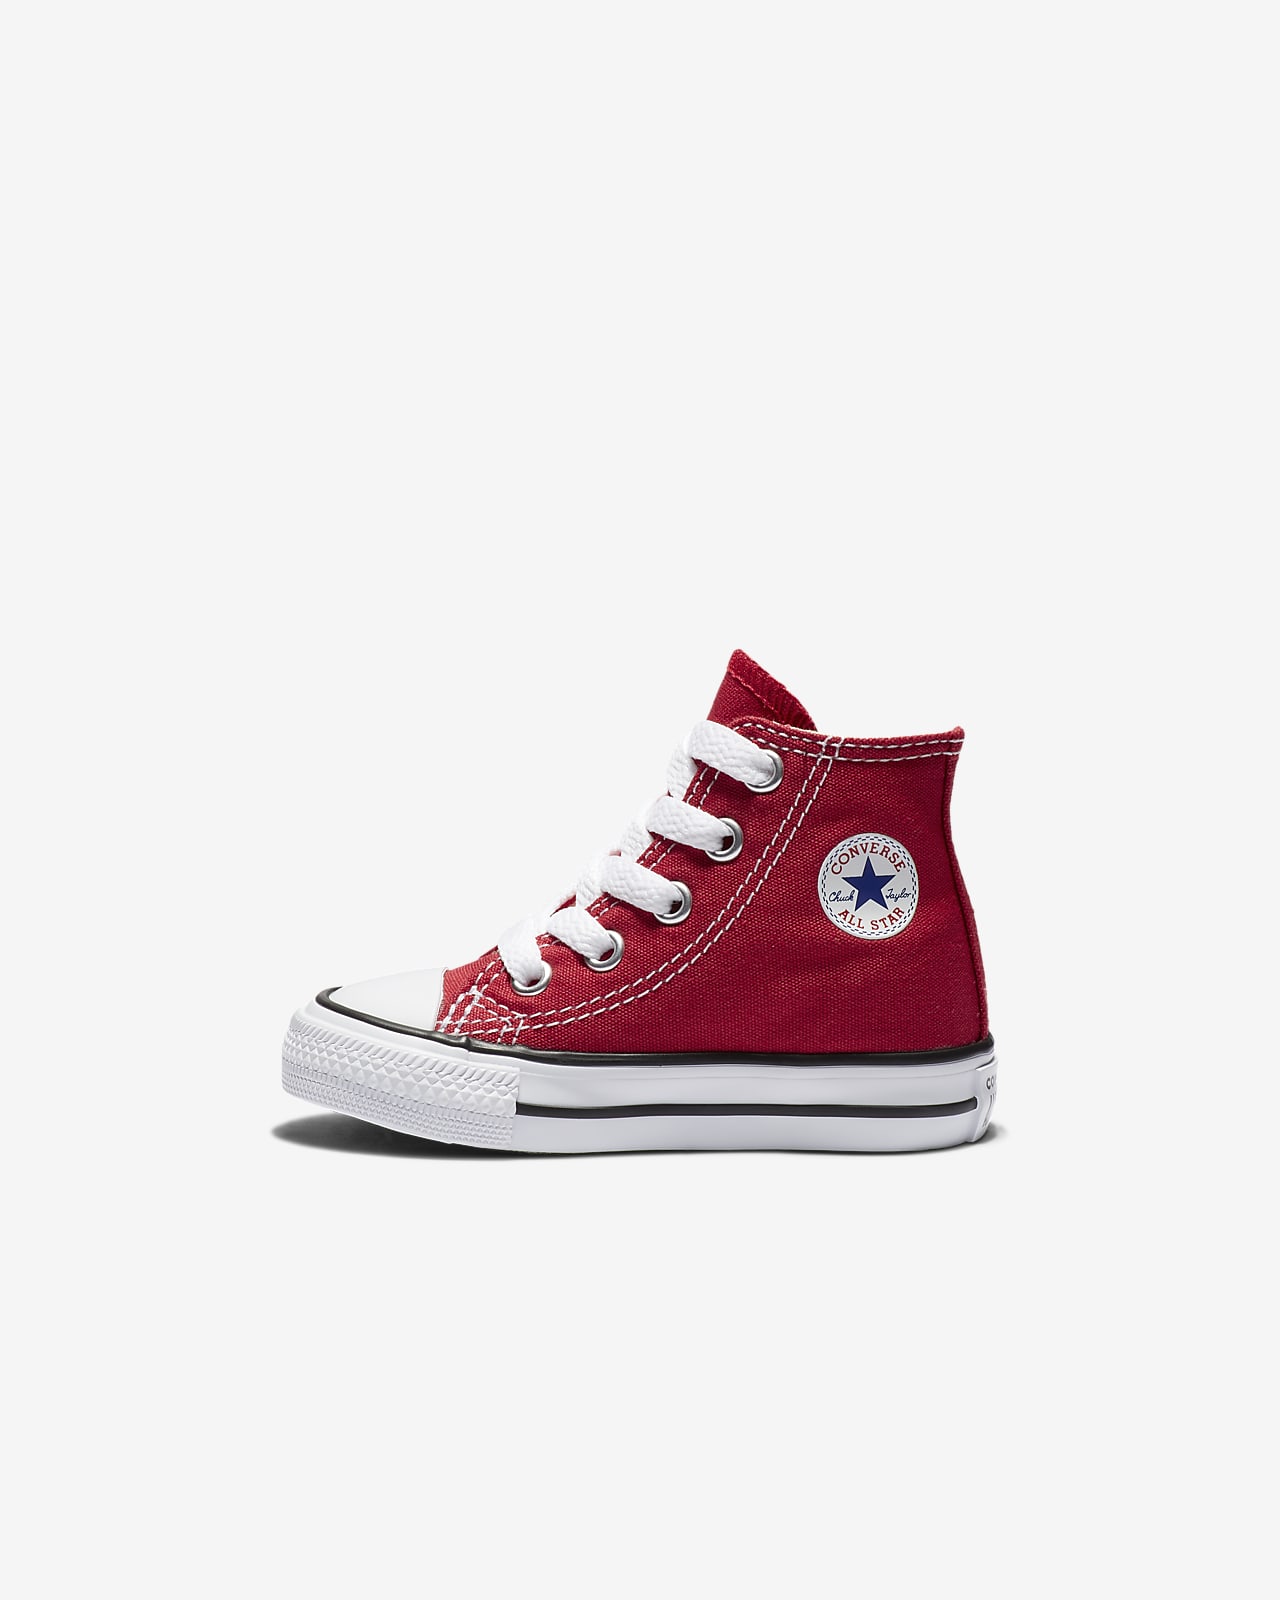 Converse Chuck Taylor All Star High Top (2c-10c) Infant/Toddler Shoe.  